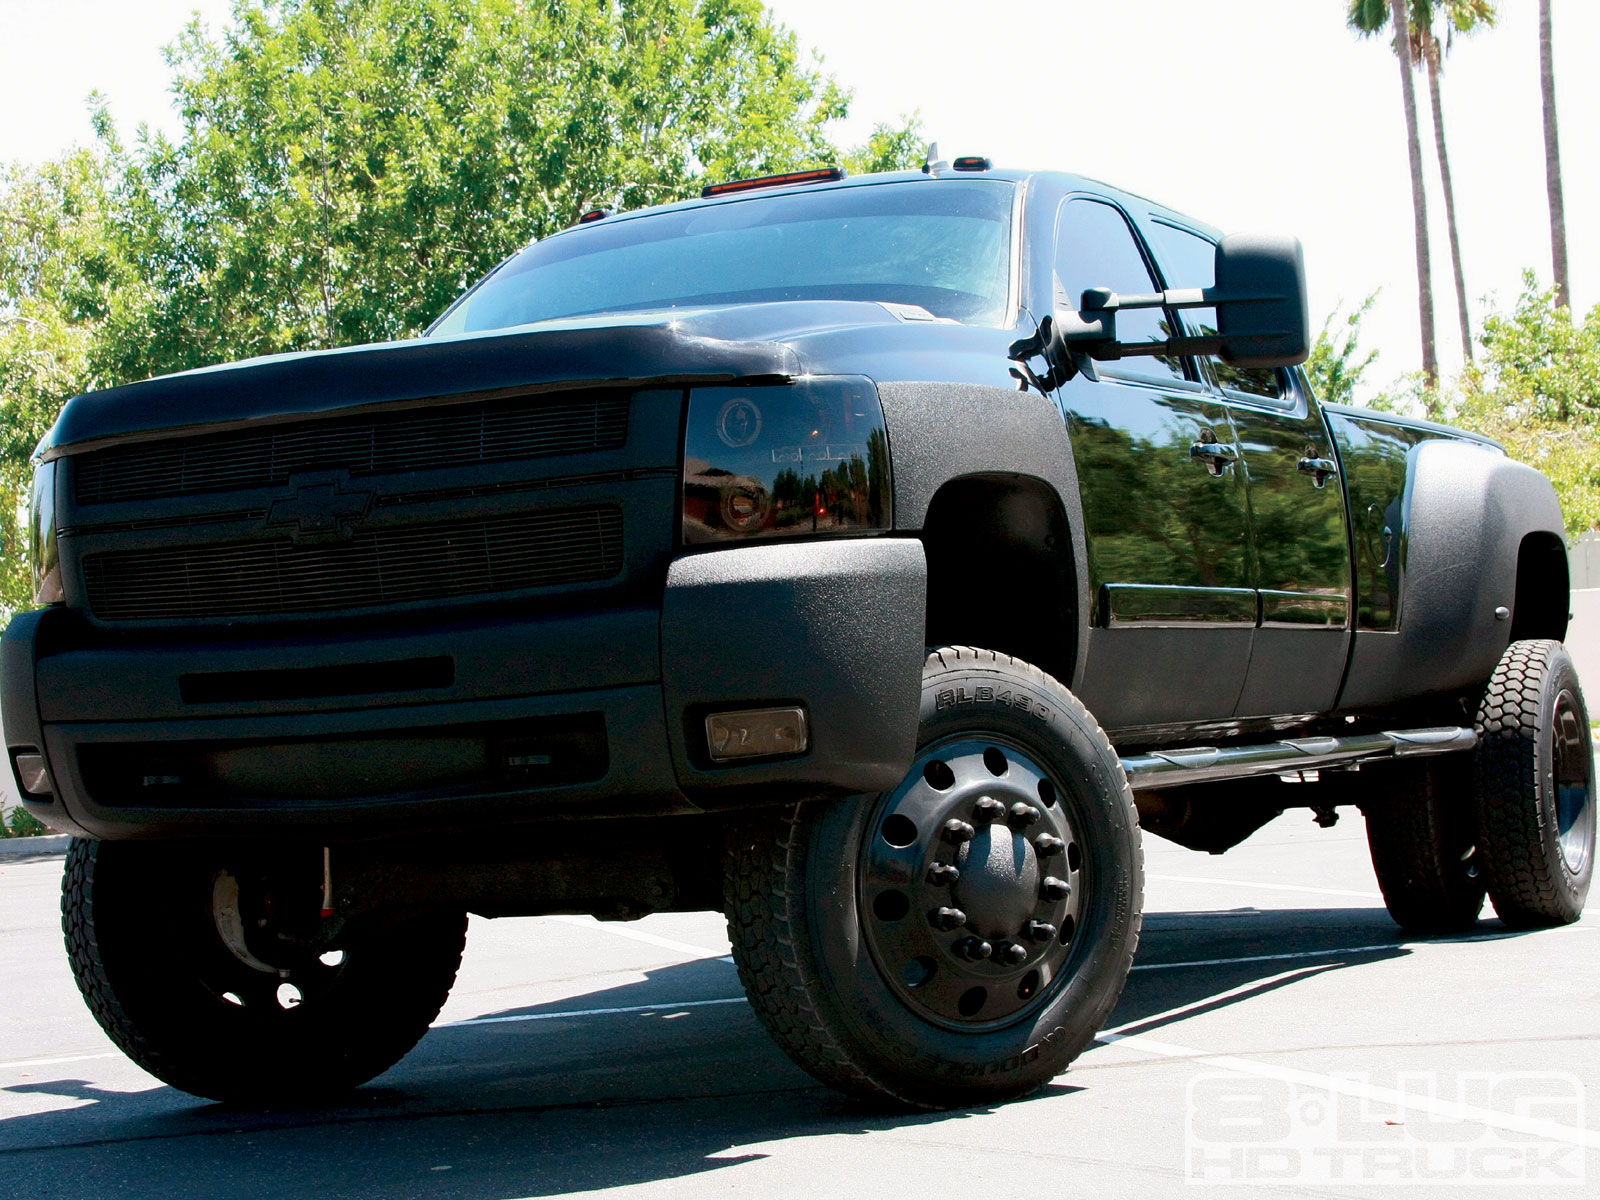 Lifted Chevy Silverado Wallpaper Image Pictures Becuo